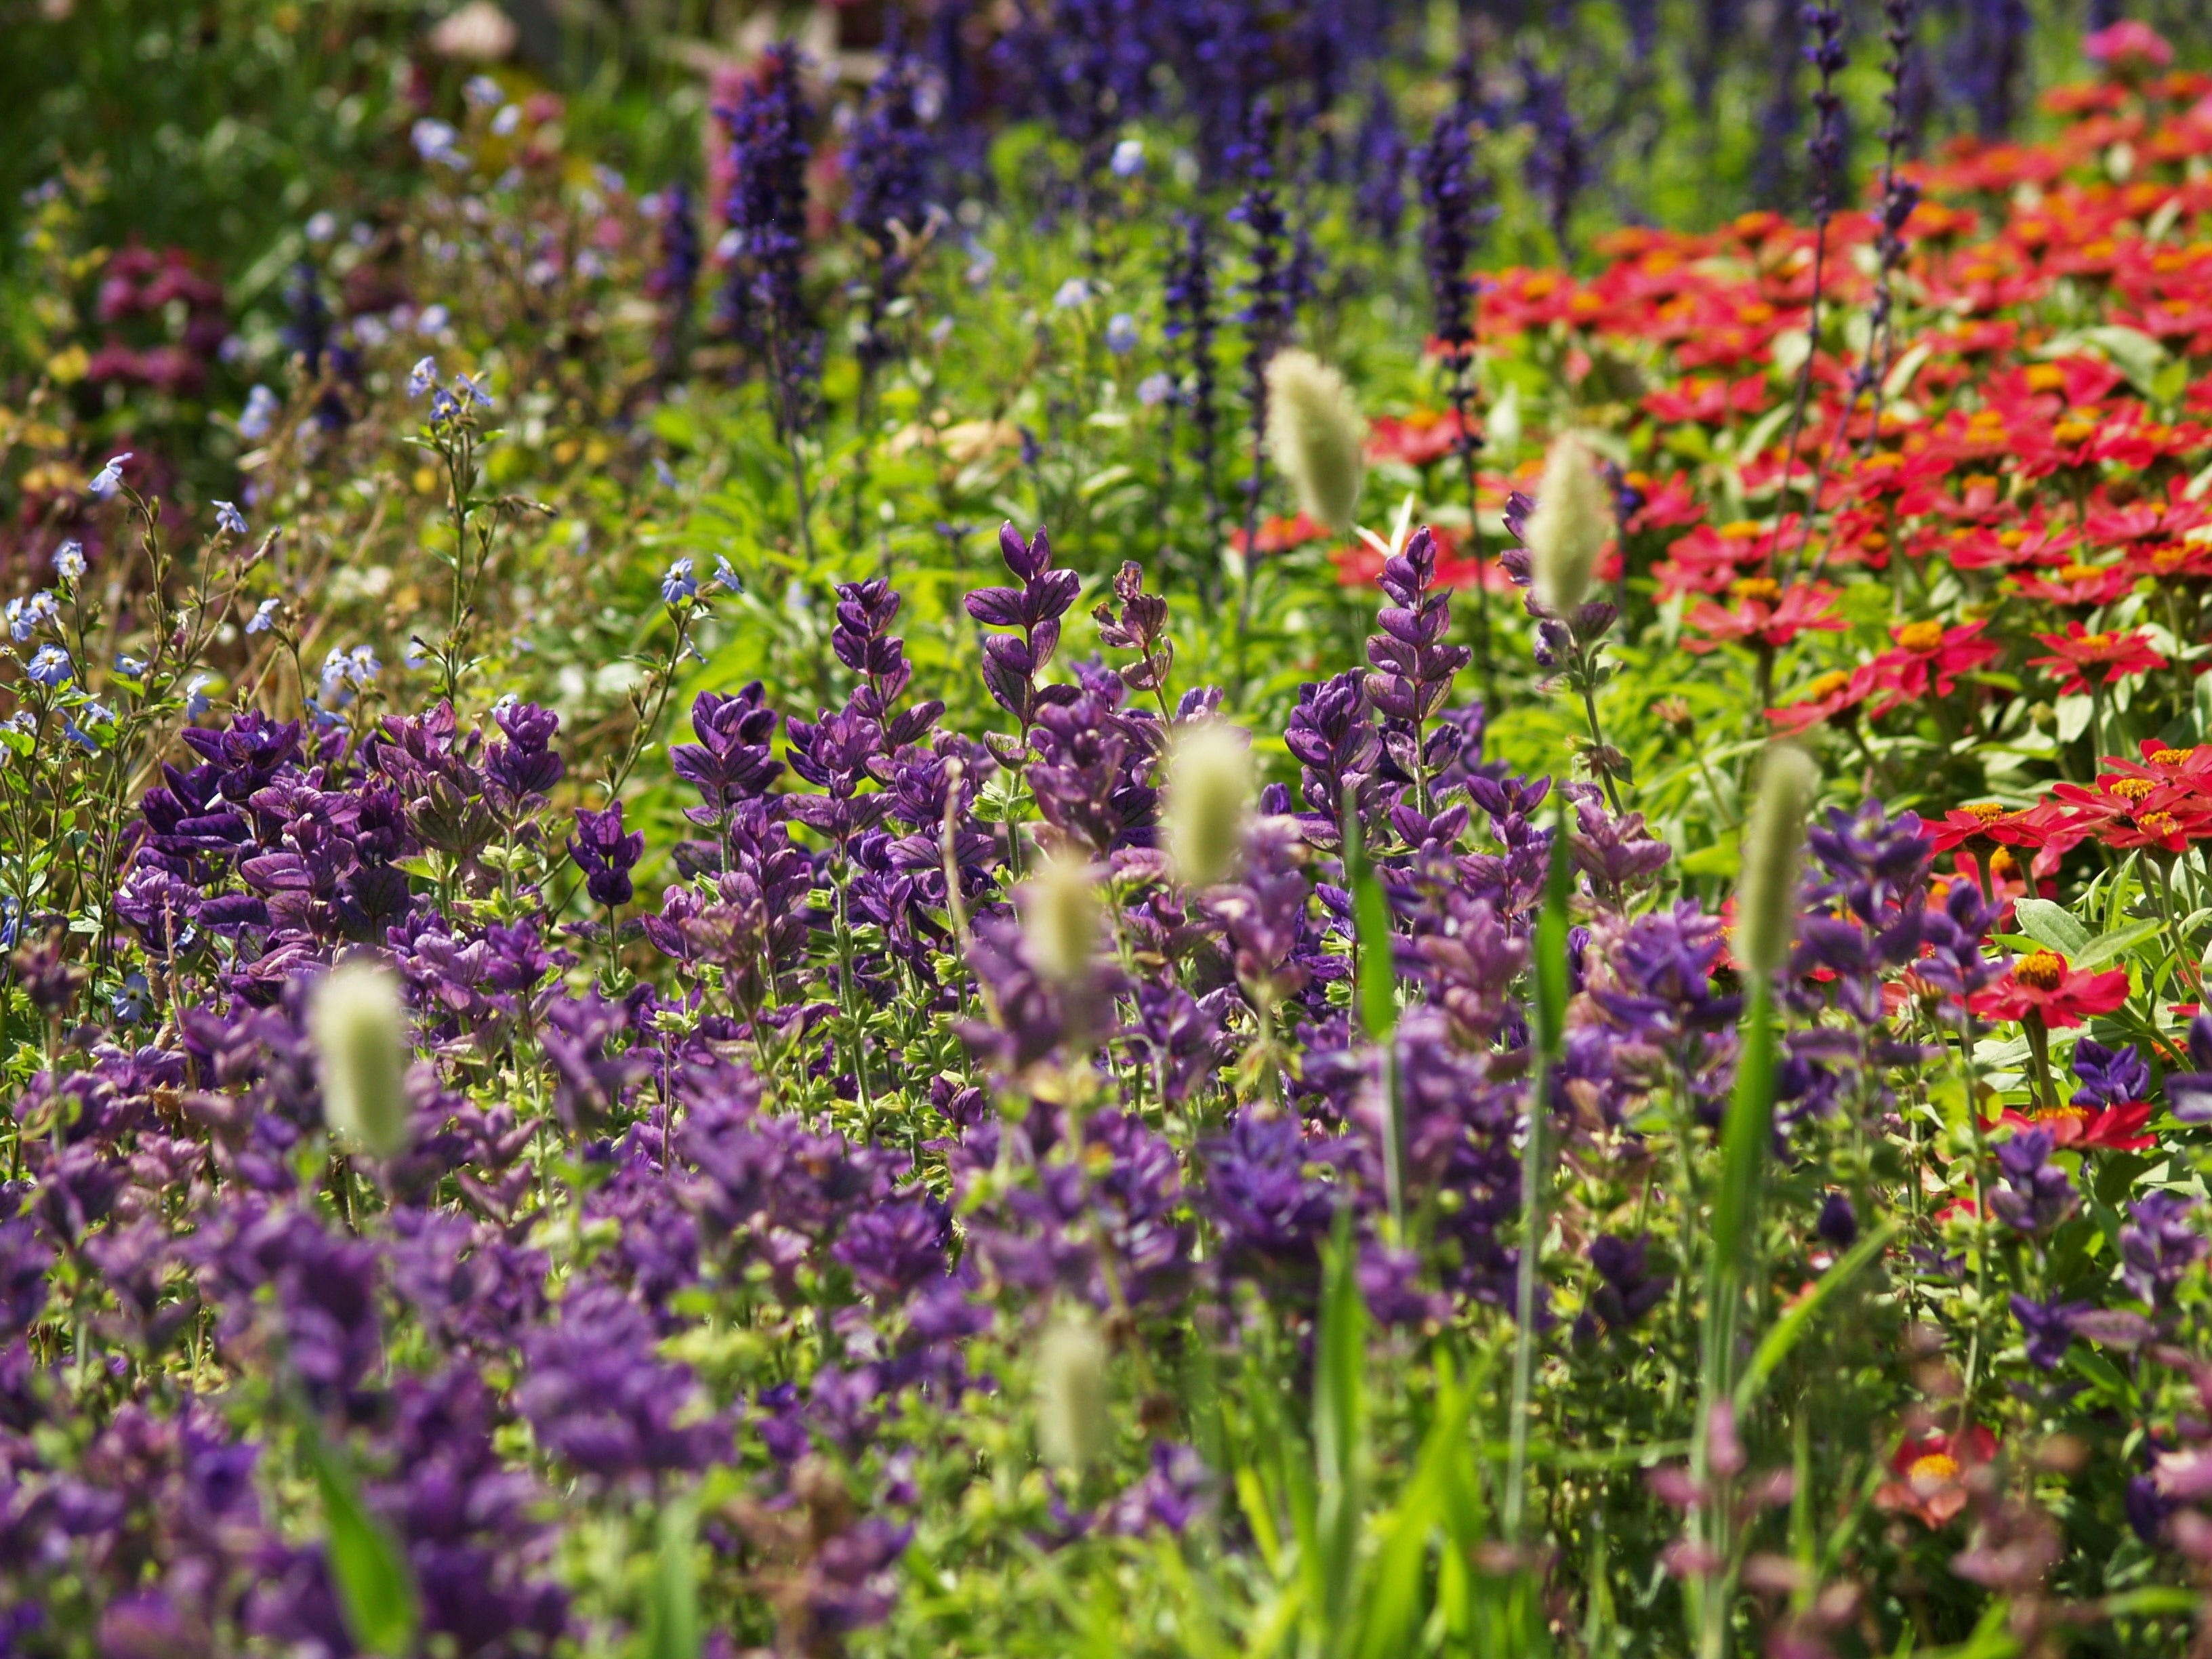 purple and red flowers